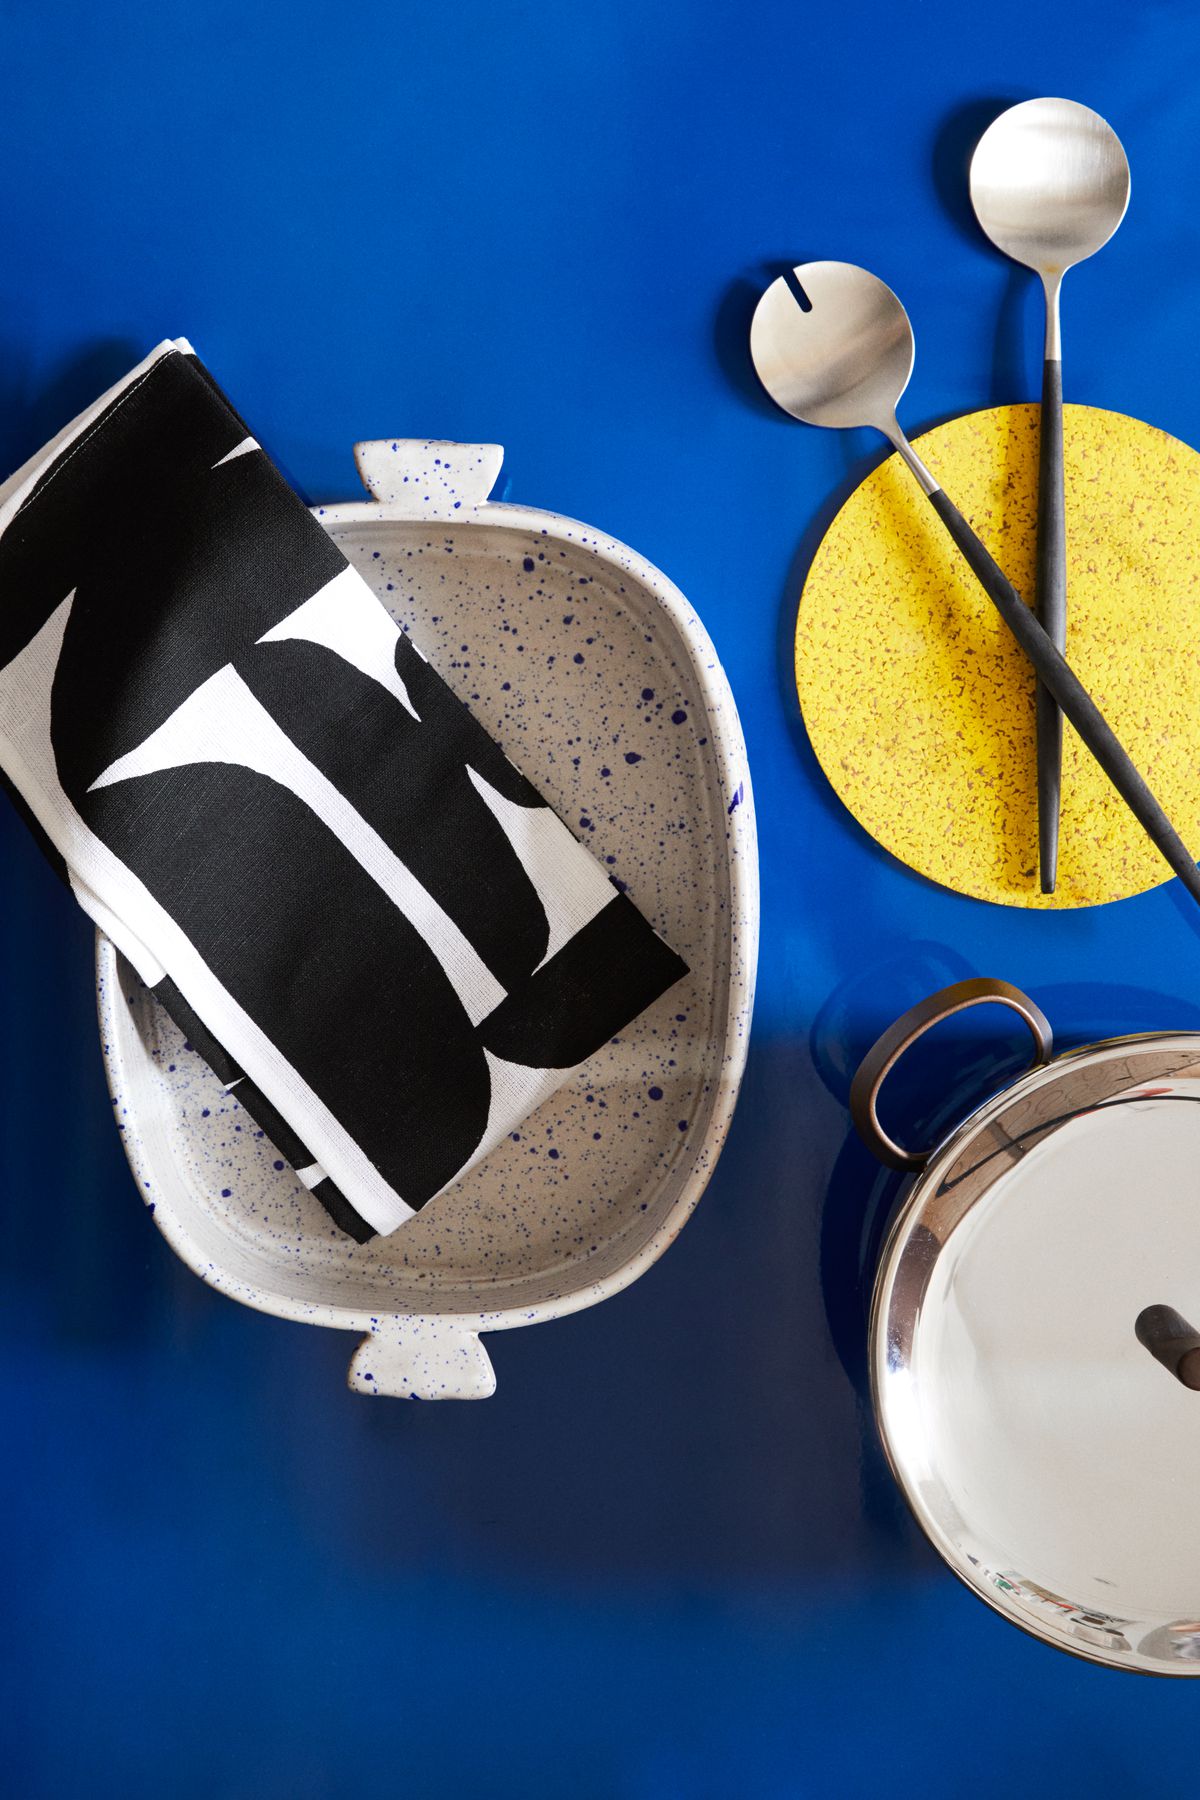 A group of kitchen items including a casserole dish, tea towels, and cookware on a flat blue surface.